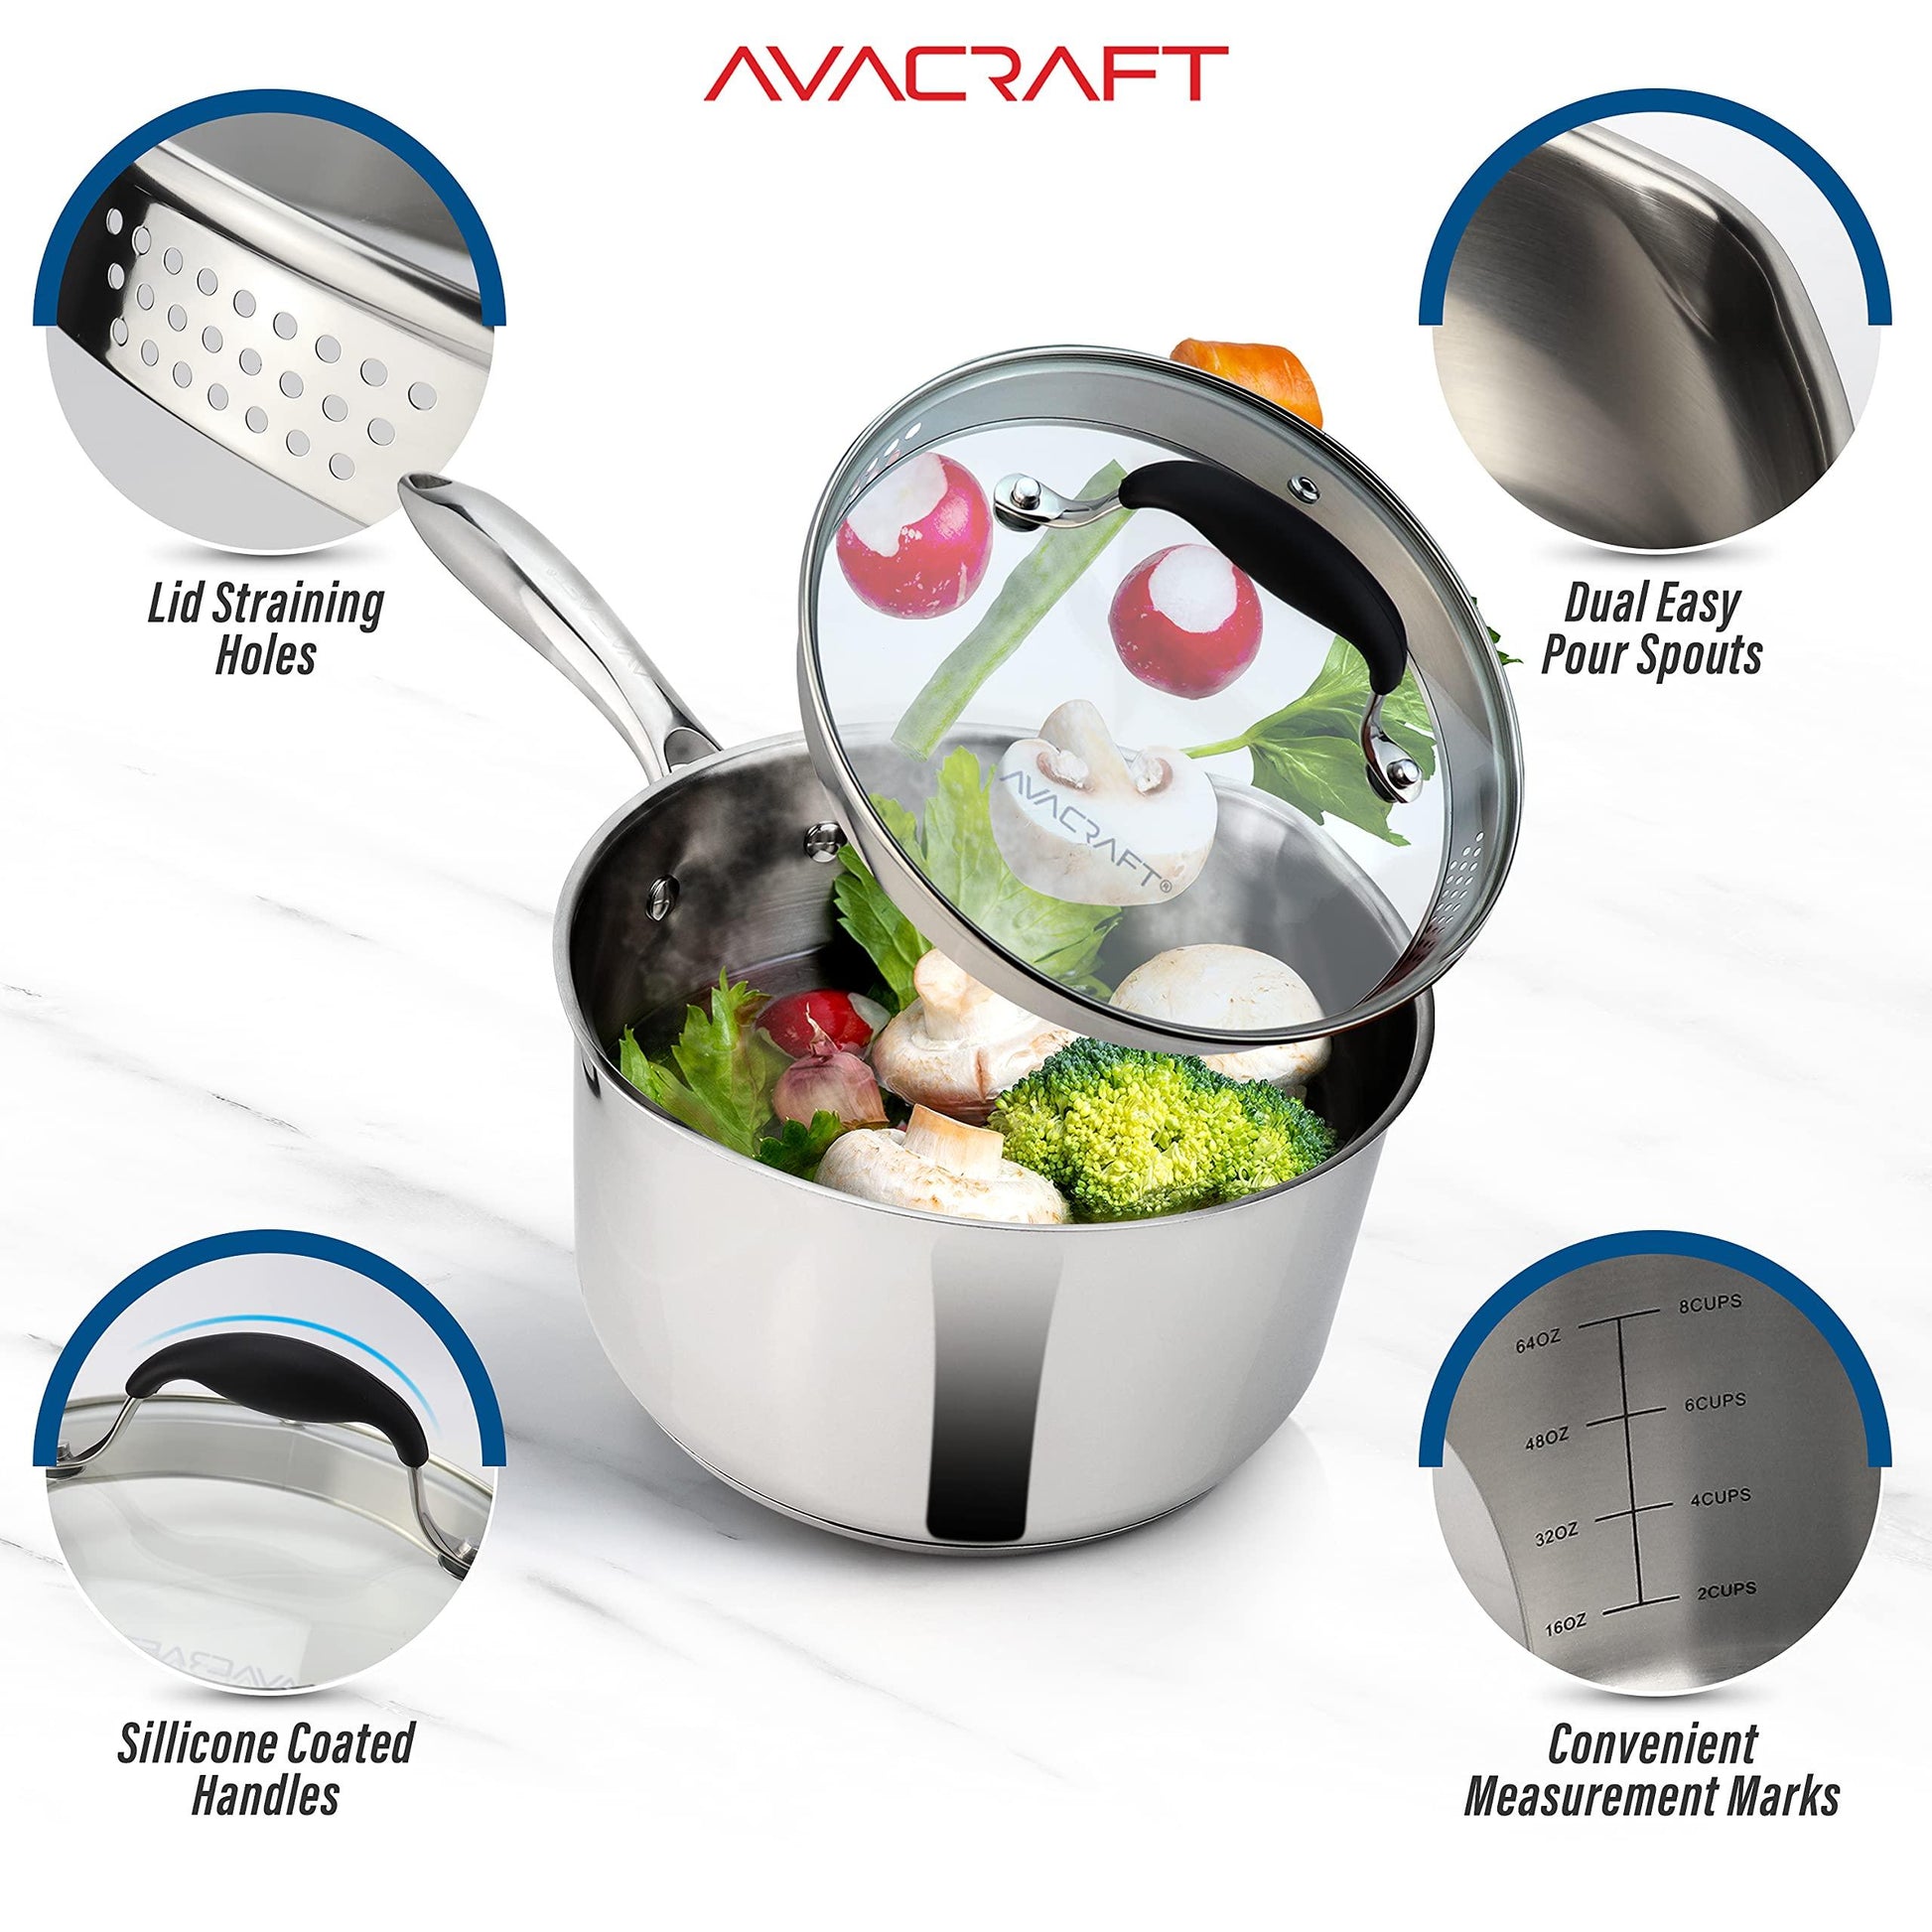 AVACRAFT Stainless Steel Saucepan with Glass Strainer Lid, Two Side Spouts for Easy Pour with Ergonomic Handle, Multipurpose Sauce Pot (Tri-Ply Capsule Bottom, 2.5 Quart) - CookCave